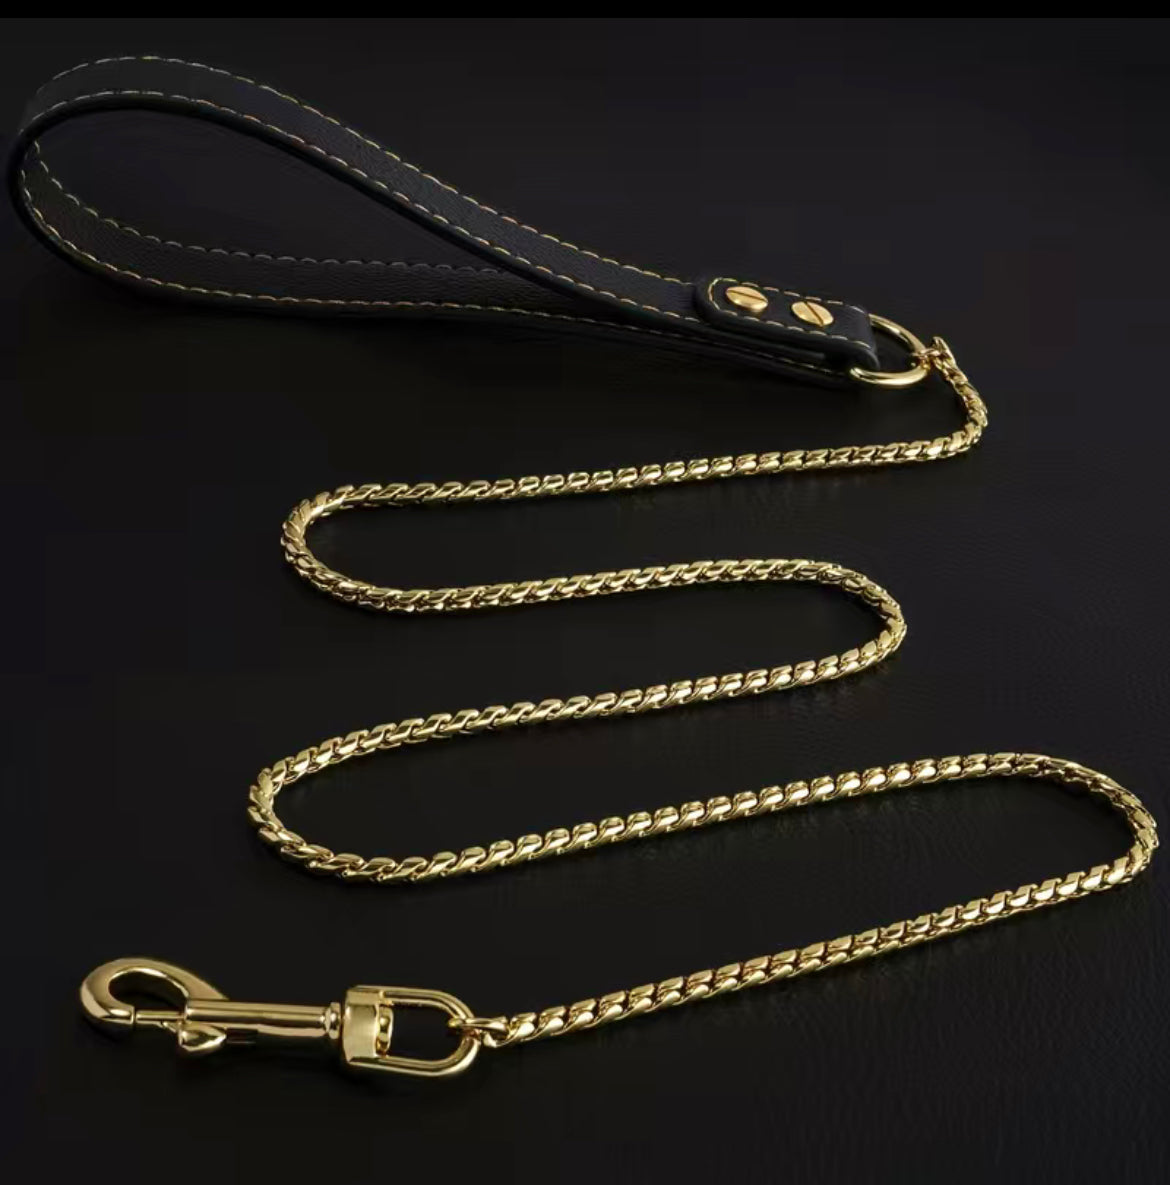 Gold Leash with leather handle